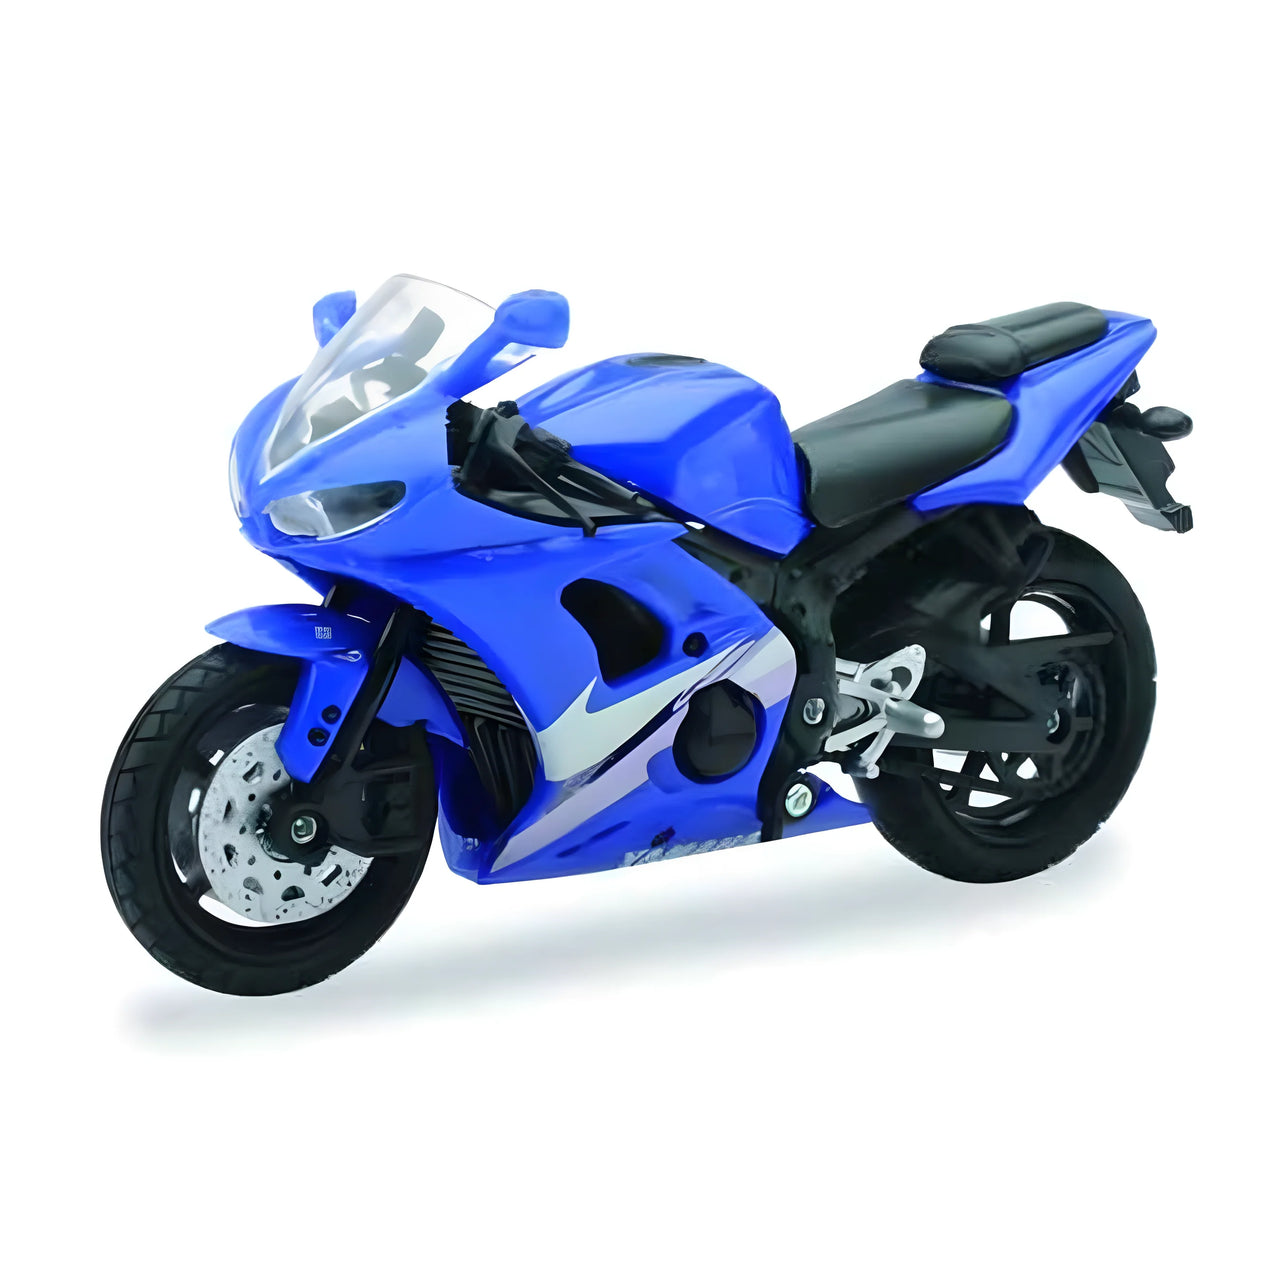 AS-67013-E Linear Motorcycle Yamaha YZF-R6 Scale 1:18 (Discontinued Model)